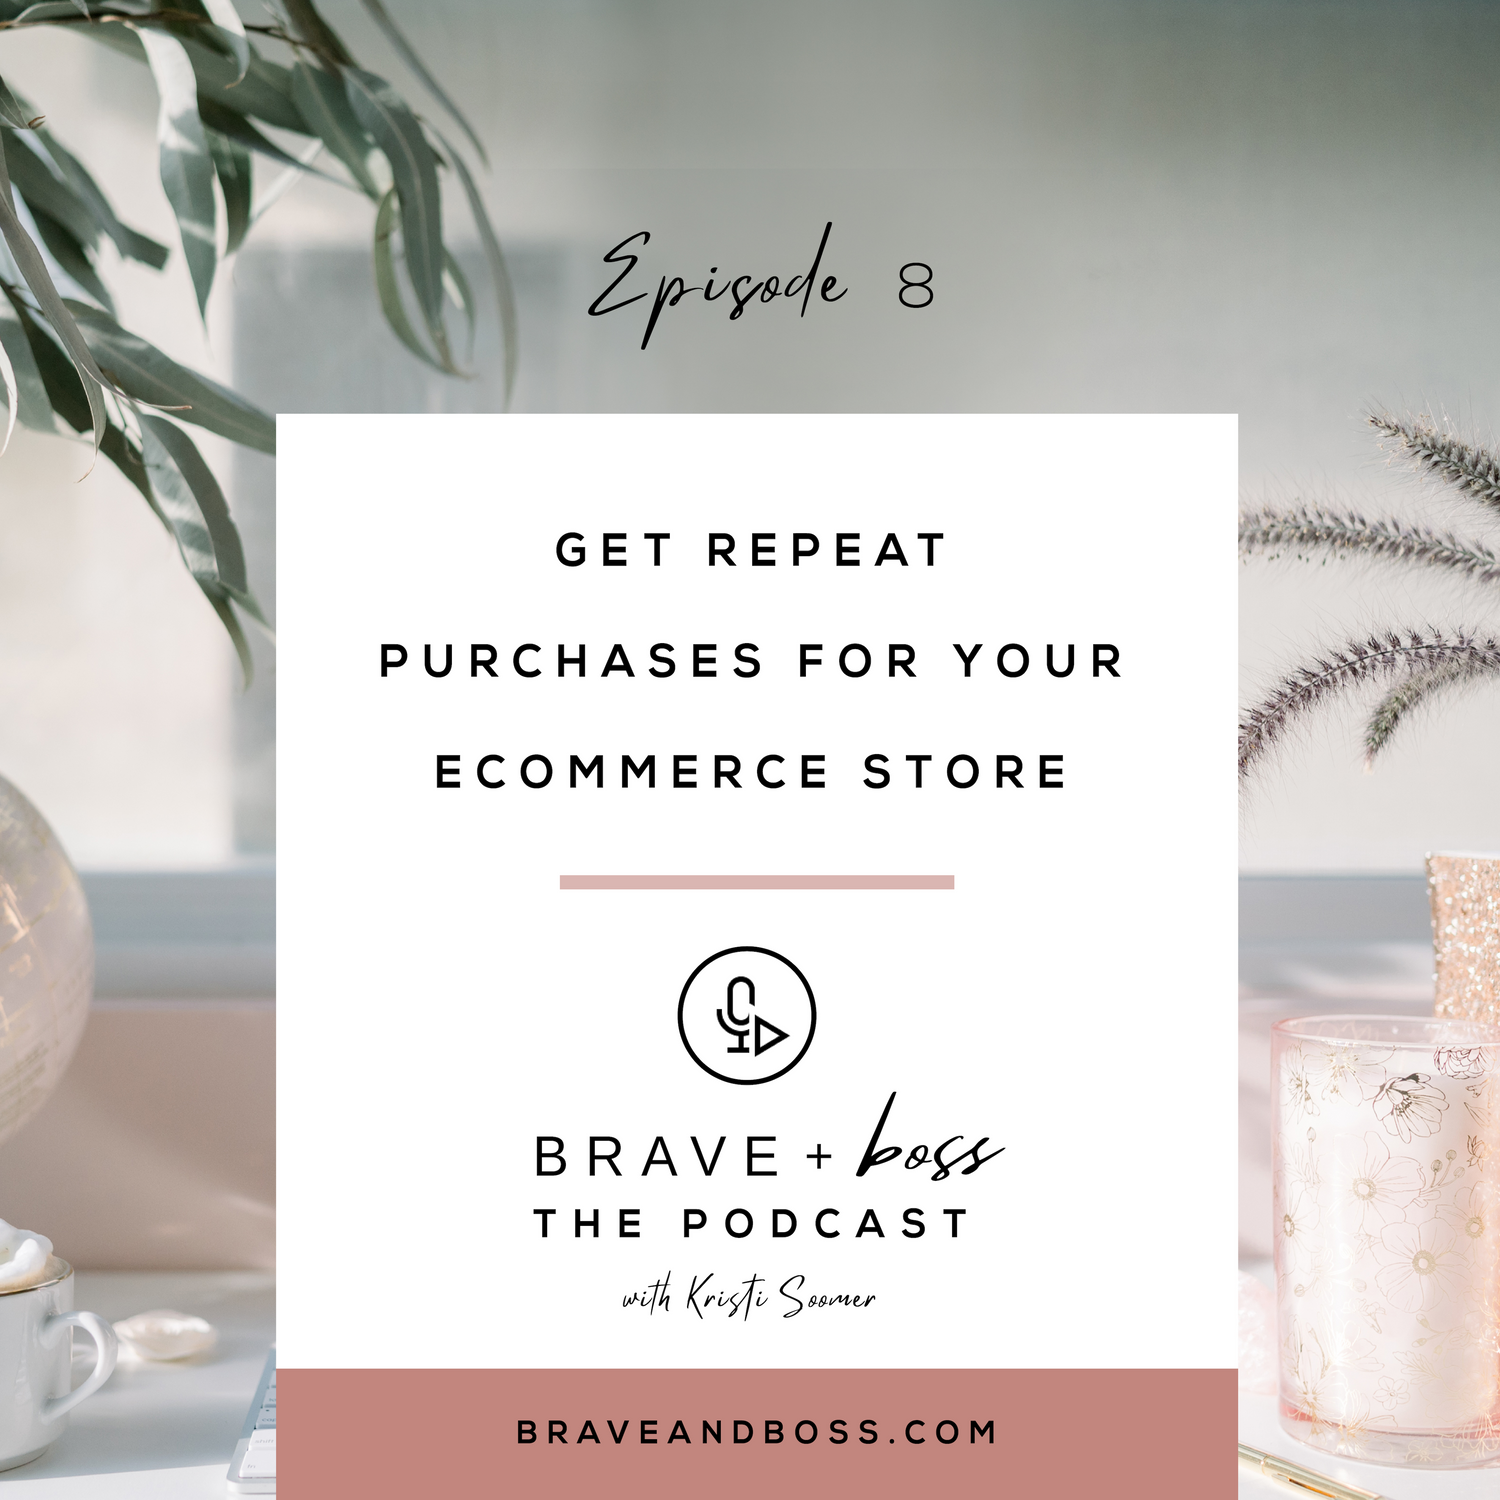 Get Repeat Purchases For Your eCommerce Store